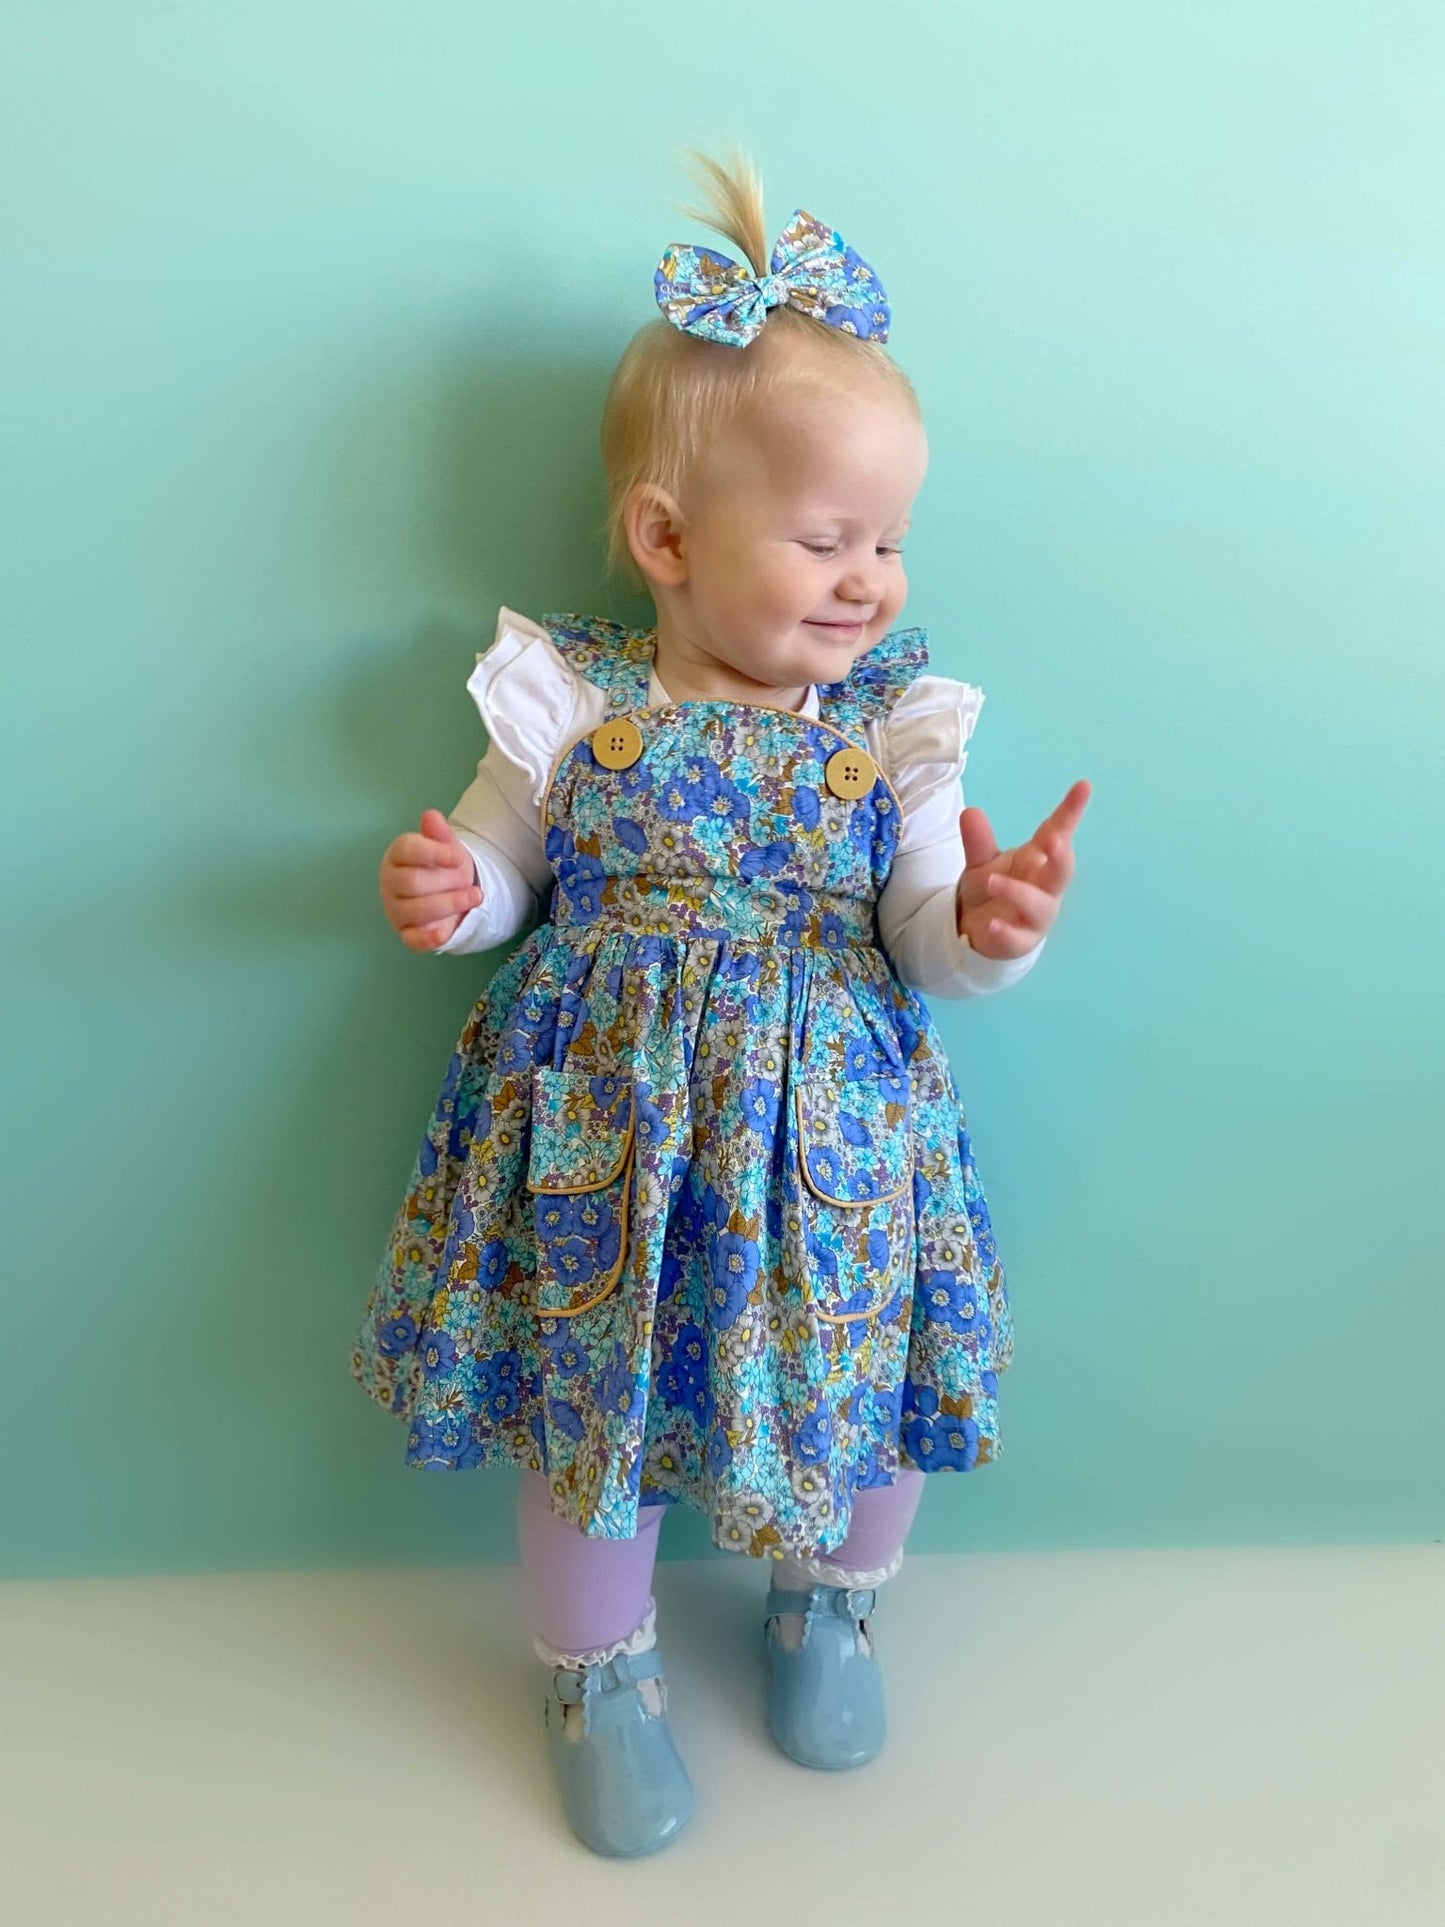 ADELAIDE BUTTON DRESS - Toots Kids